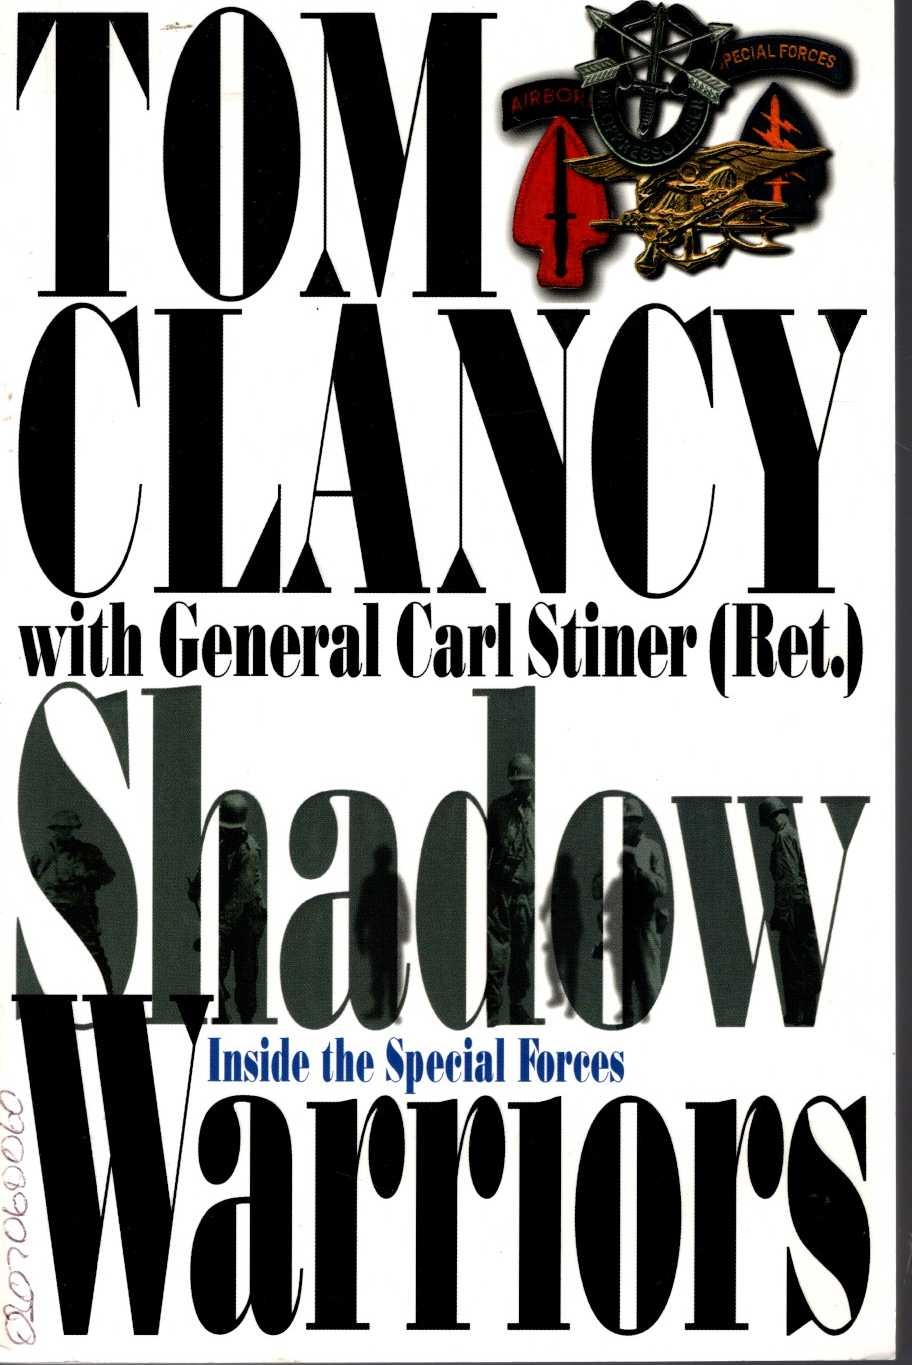 (Tom Clancy & General Carl Stiner Ret.) SHADOW WARRIORS. Inside the Special Forces front book cover image